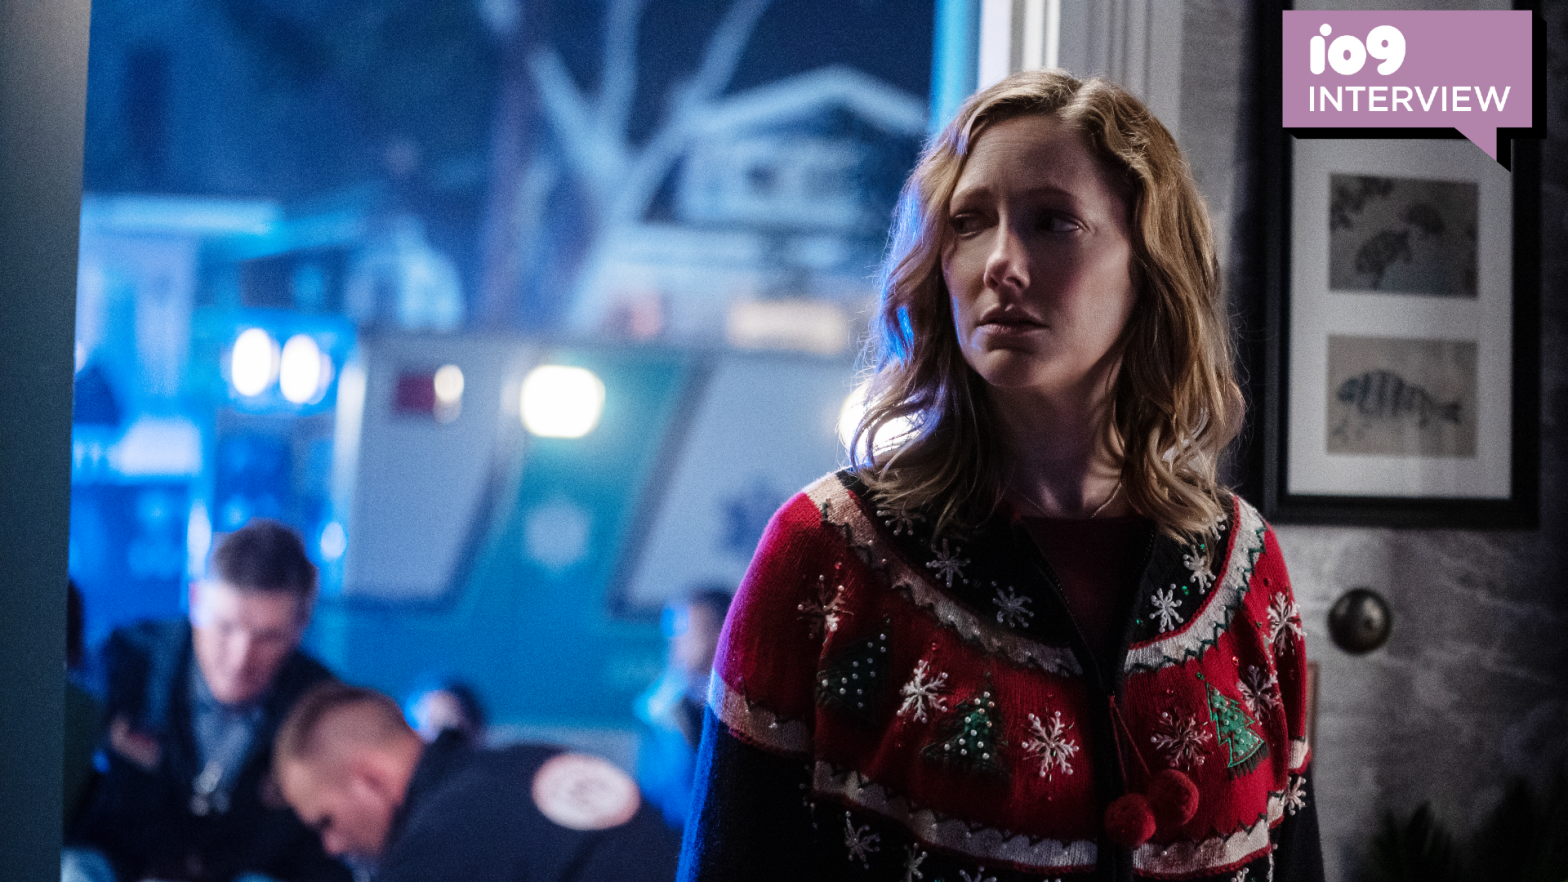 Karen (Judy Greer) looks both concerned and festive. (Image: Universal Pictures)